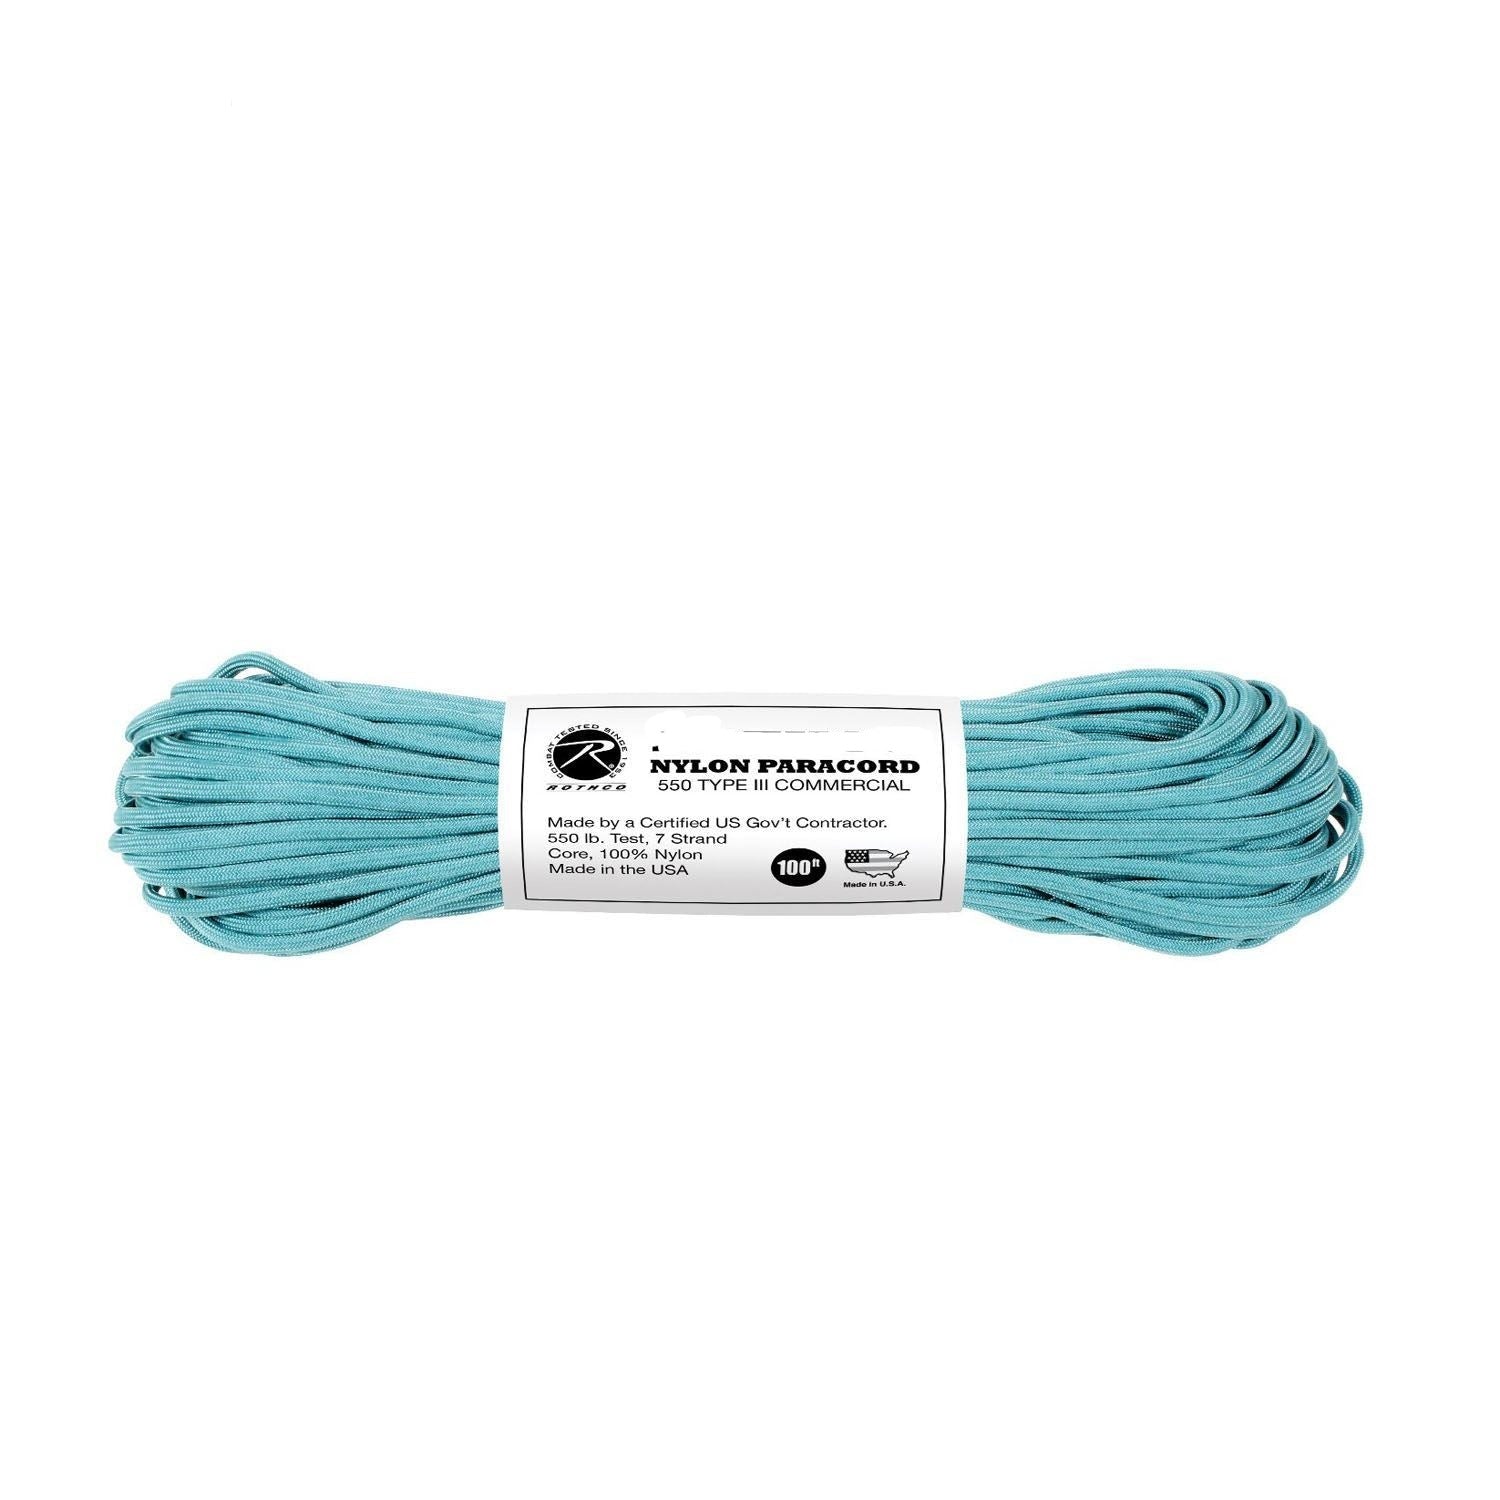 Nylon Paracord Type III 550 LB 100 FT Color : Turquoise (5 per pack)